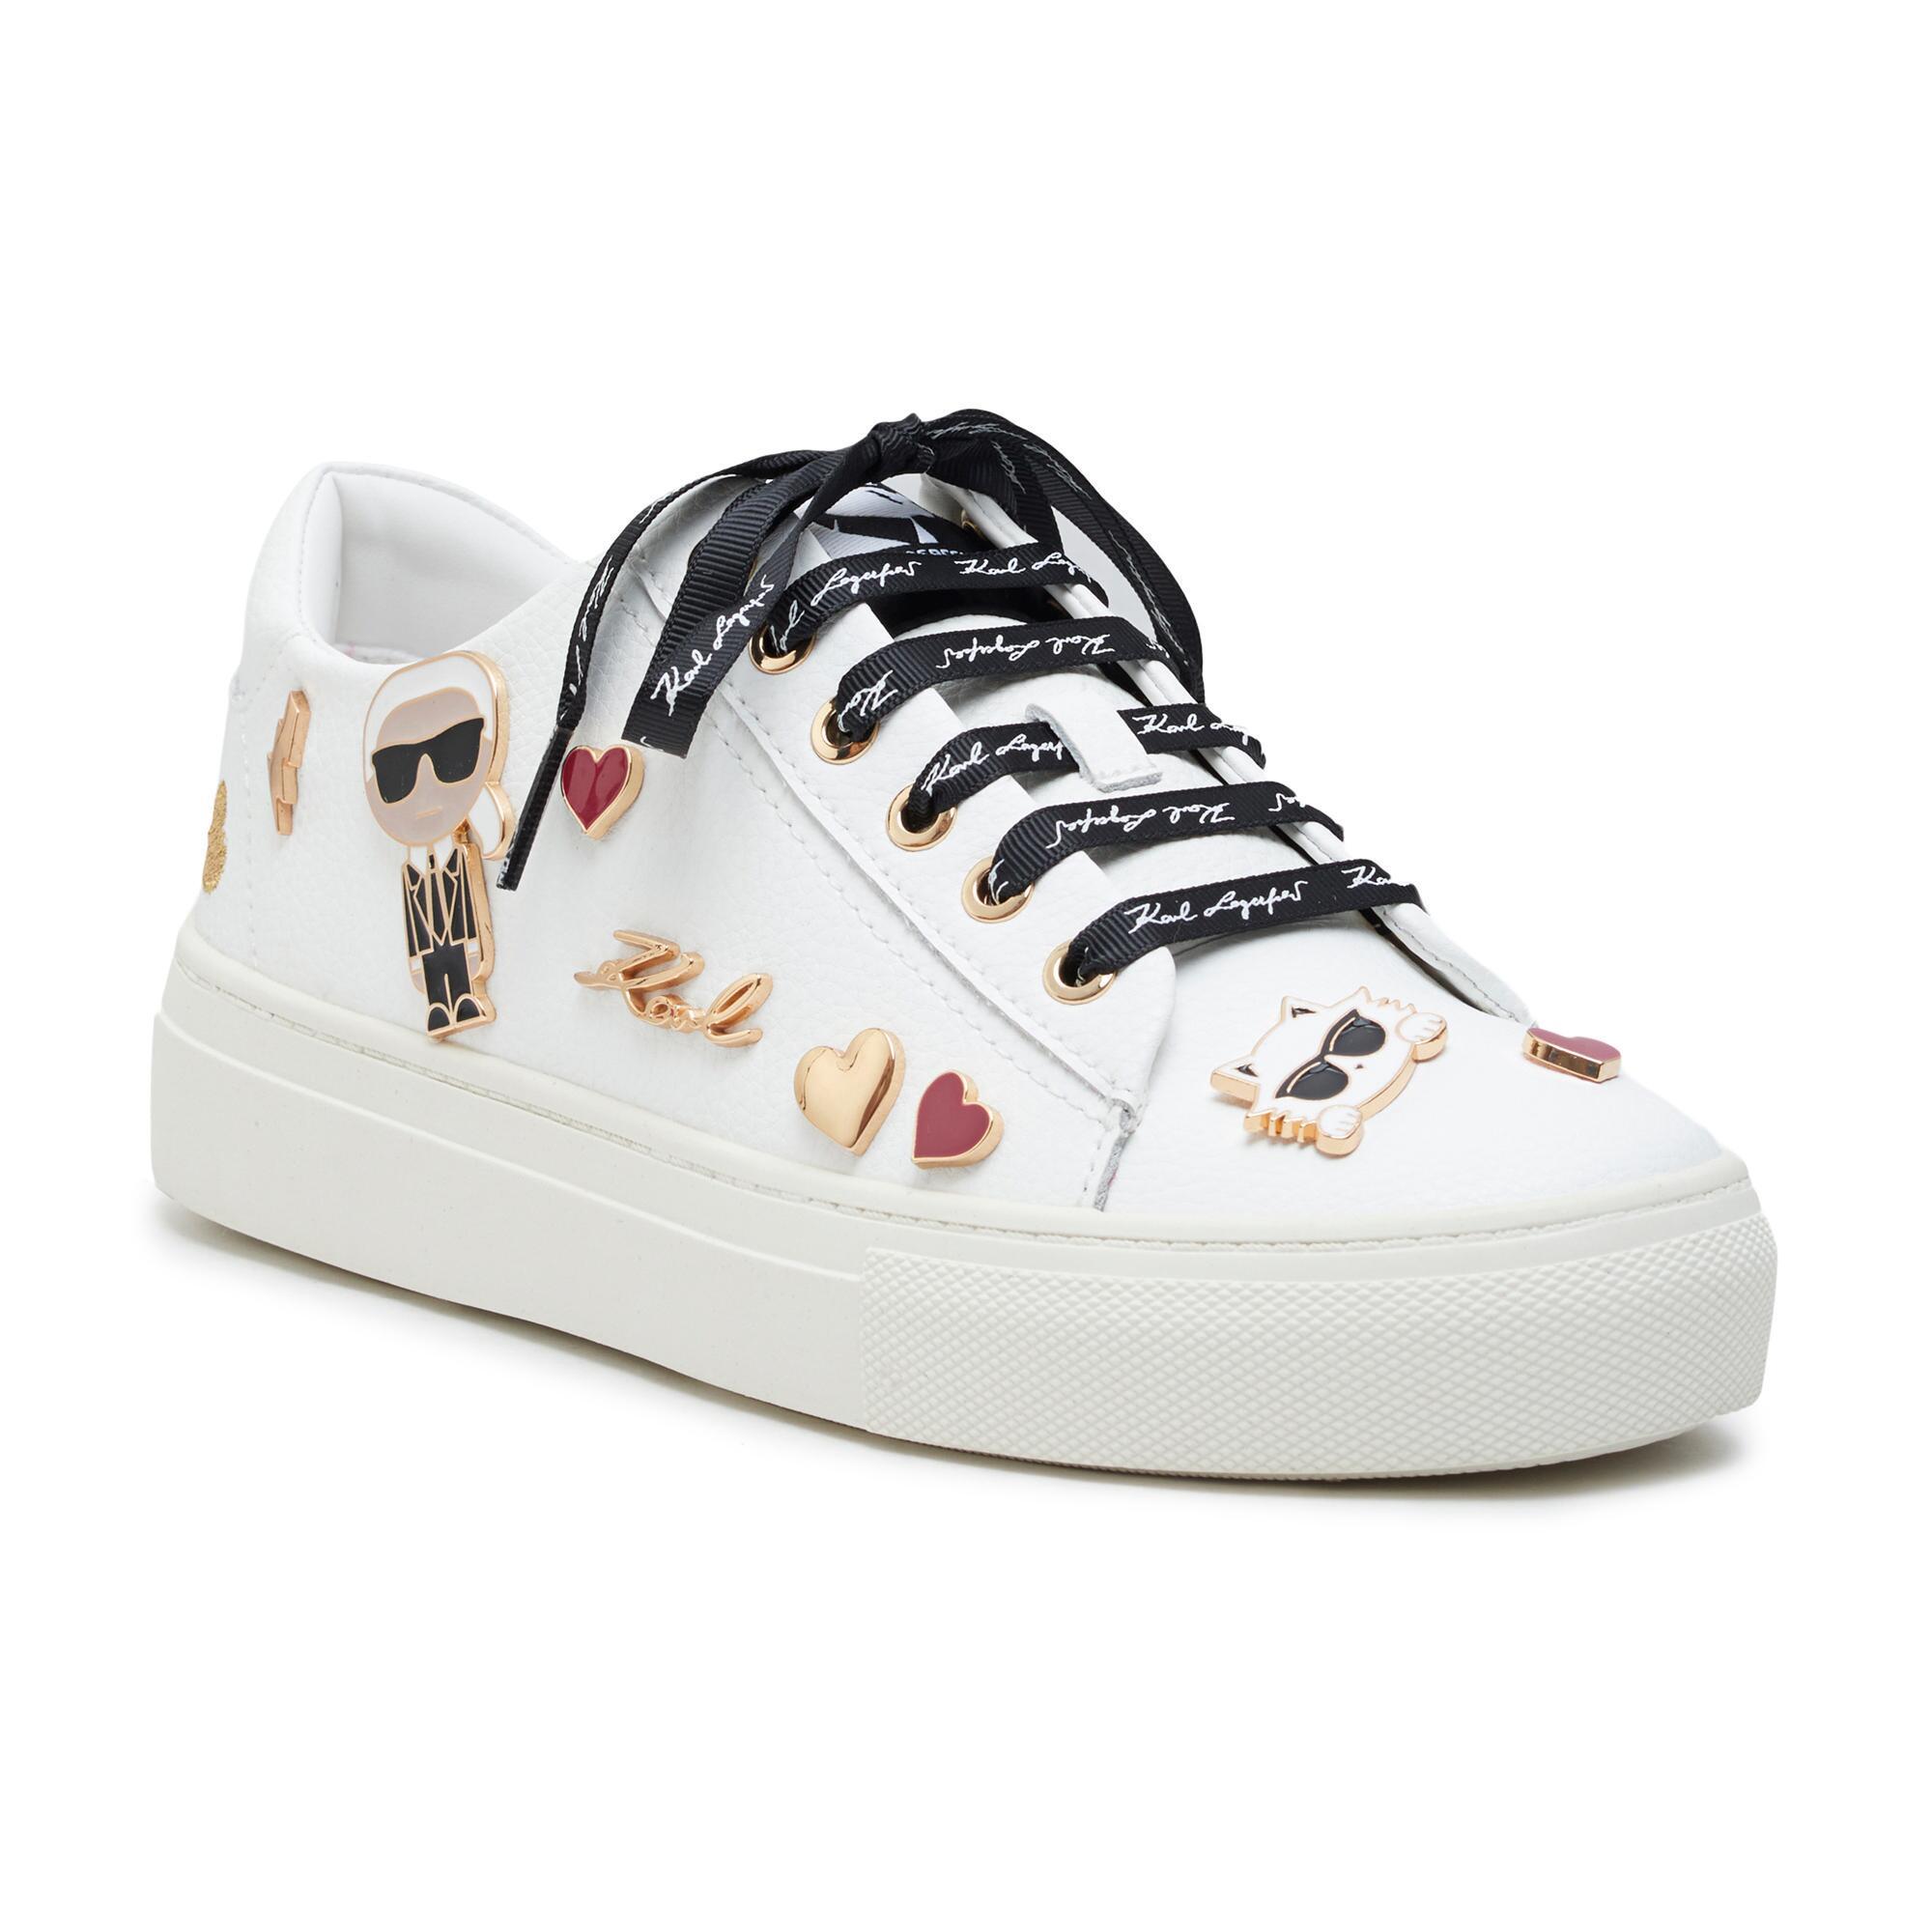 Karl Lagerfeld Cate Pins Lace Up Sneaker in White | Lyst